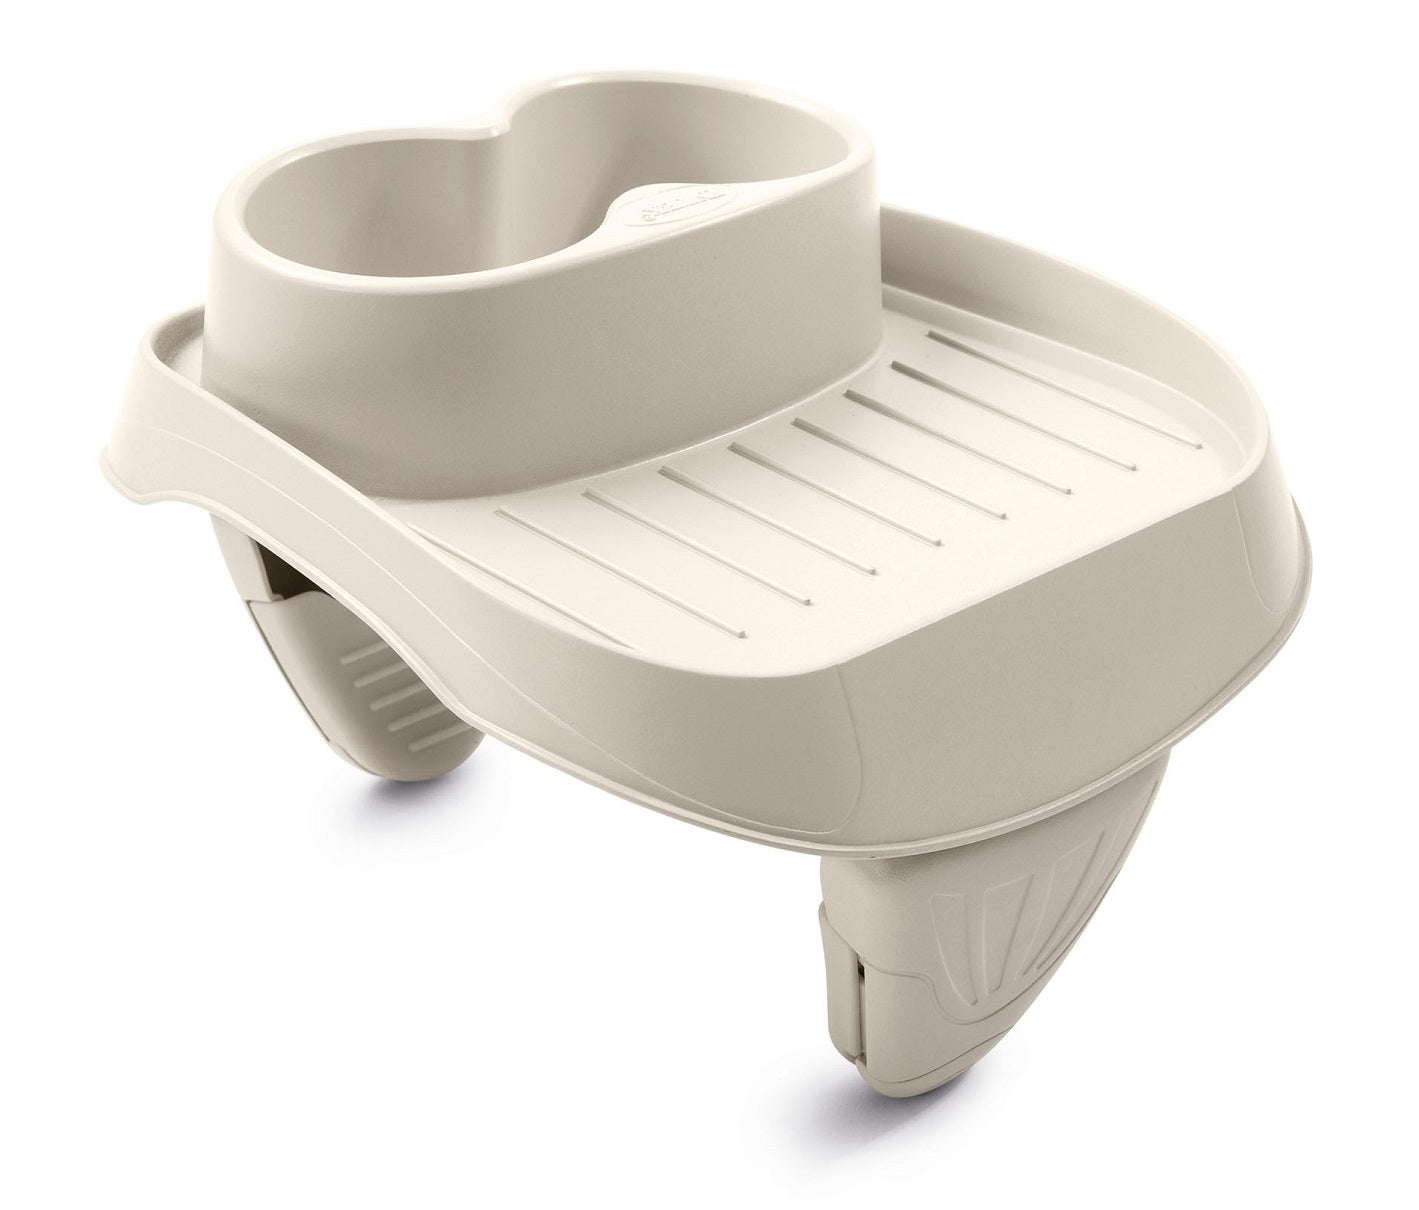 Intex PureSpa Inflatable Hot Tub Cup Holder Holds 2 Standard Beverages